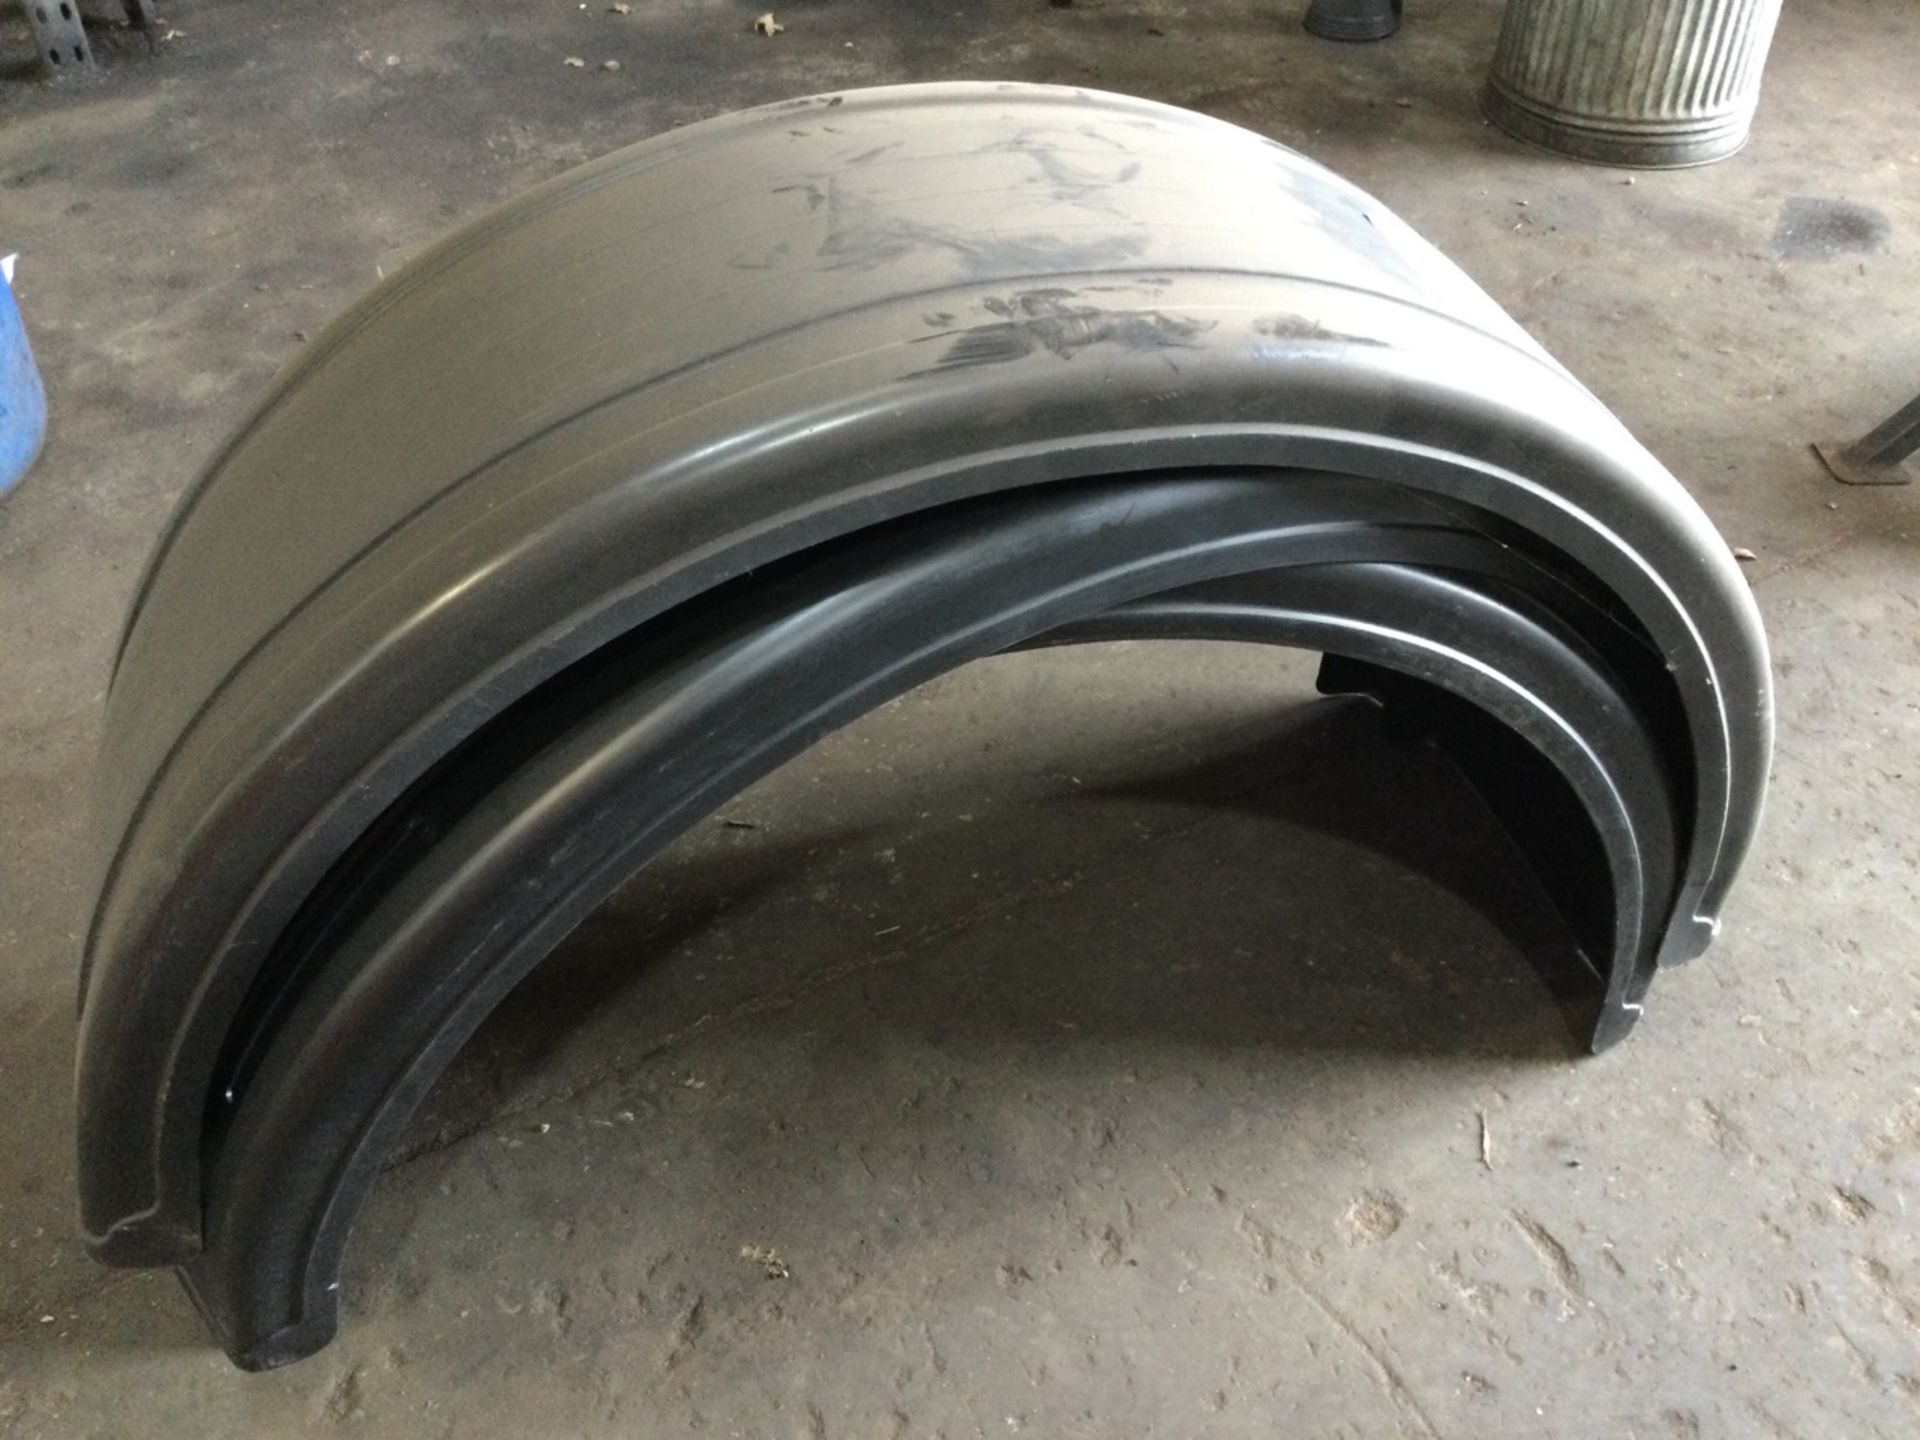 3: Plastic Truck Mudguards, Specific Type Unknown